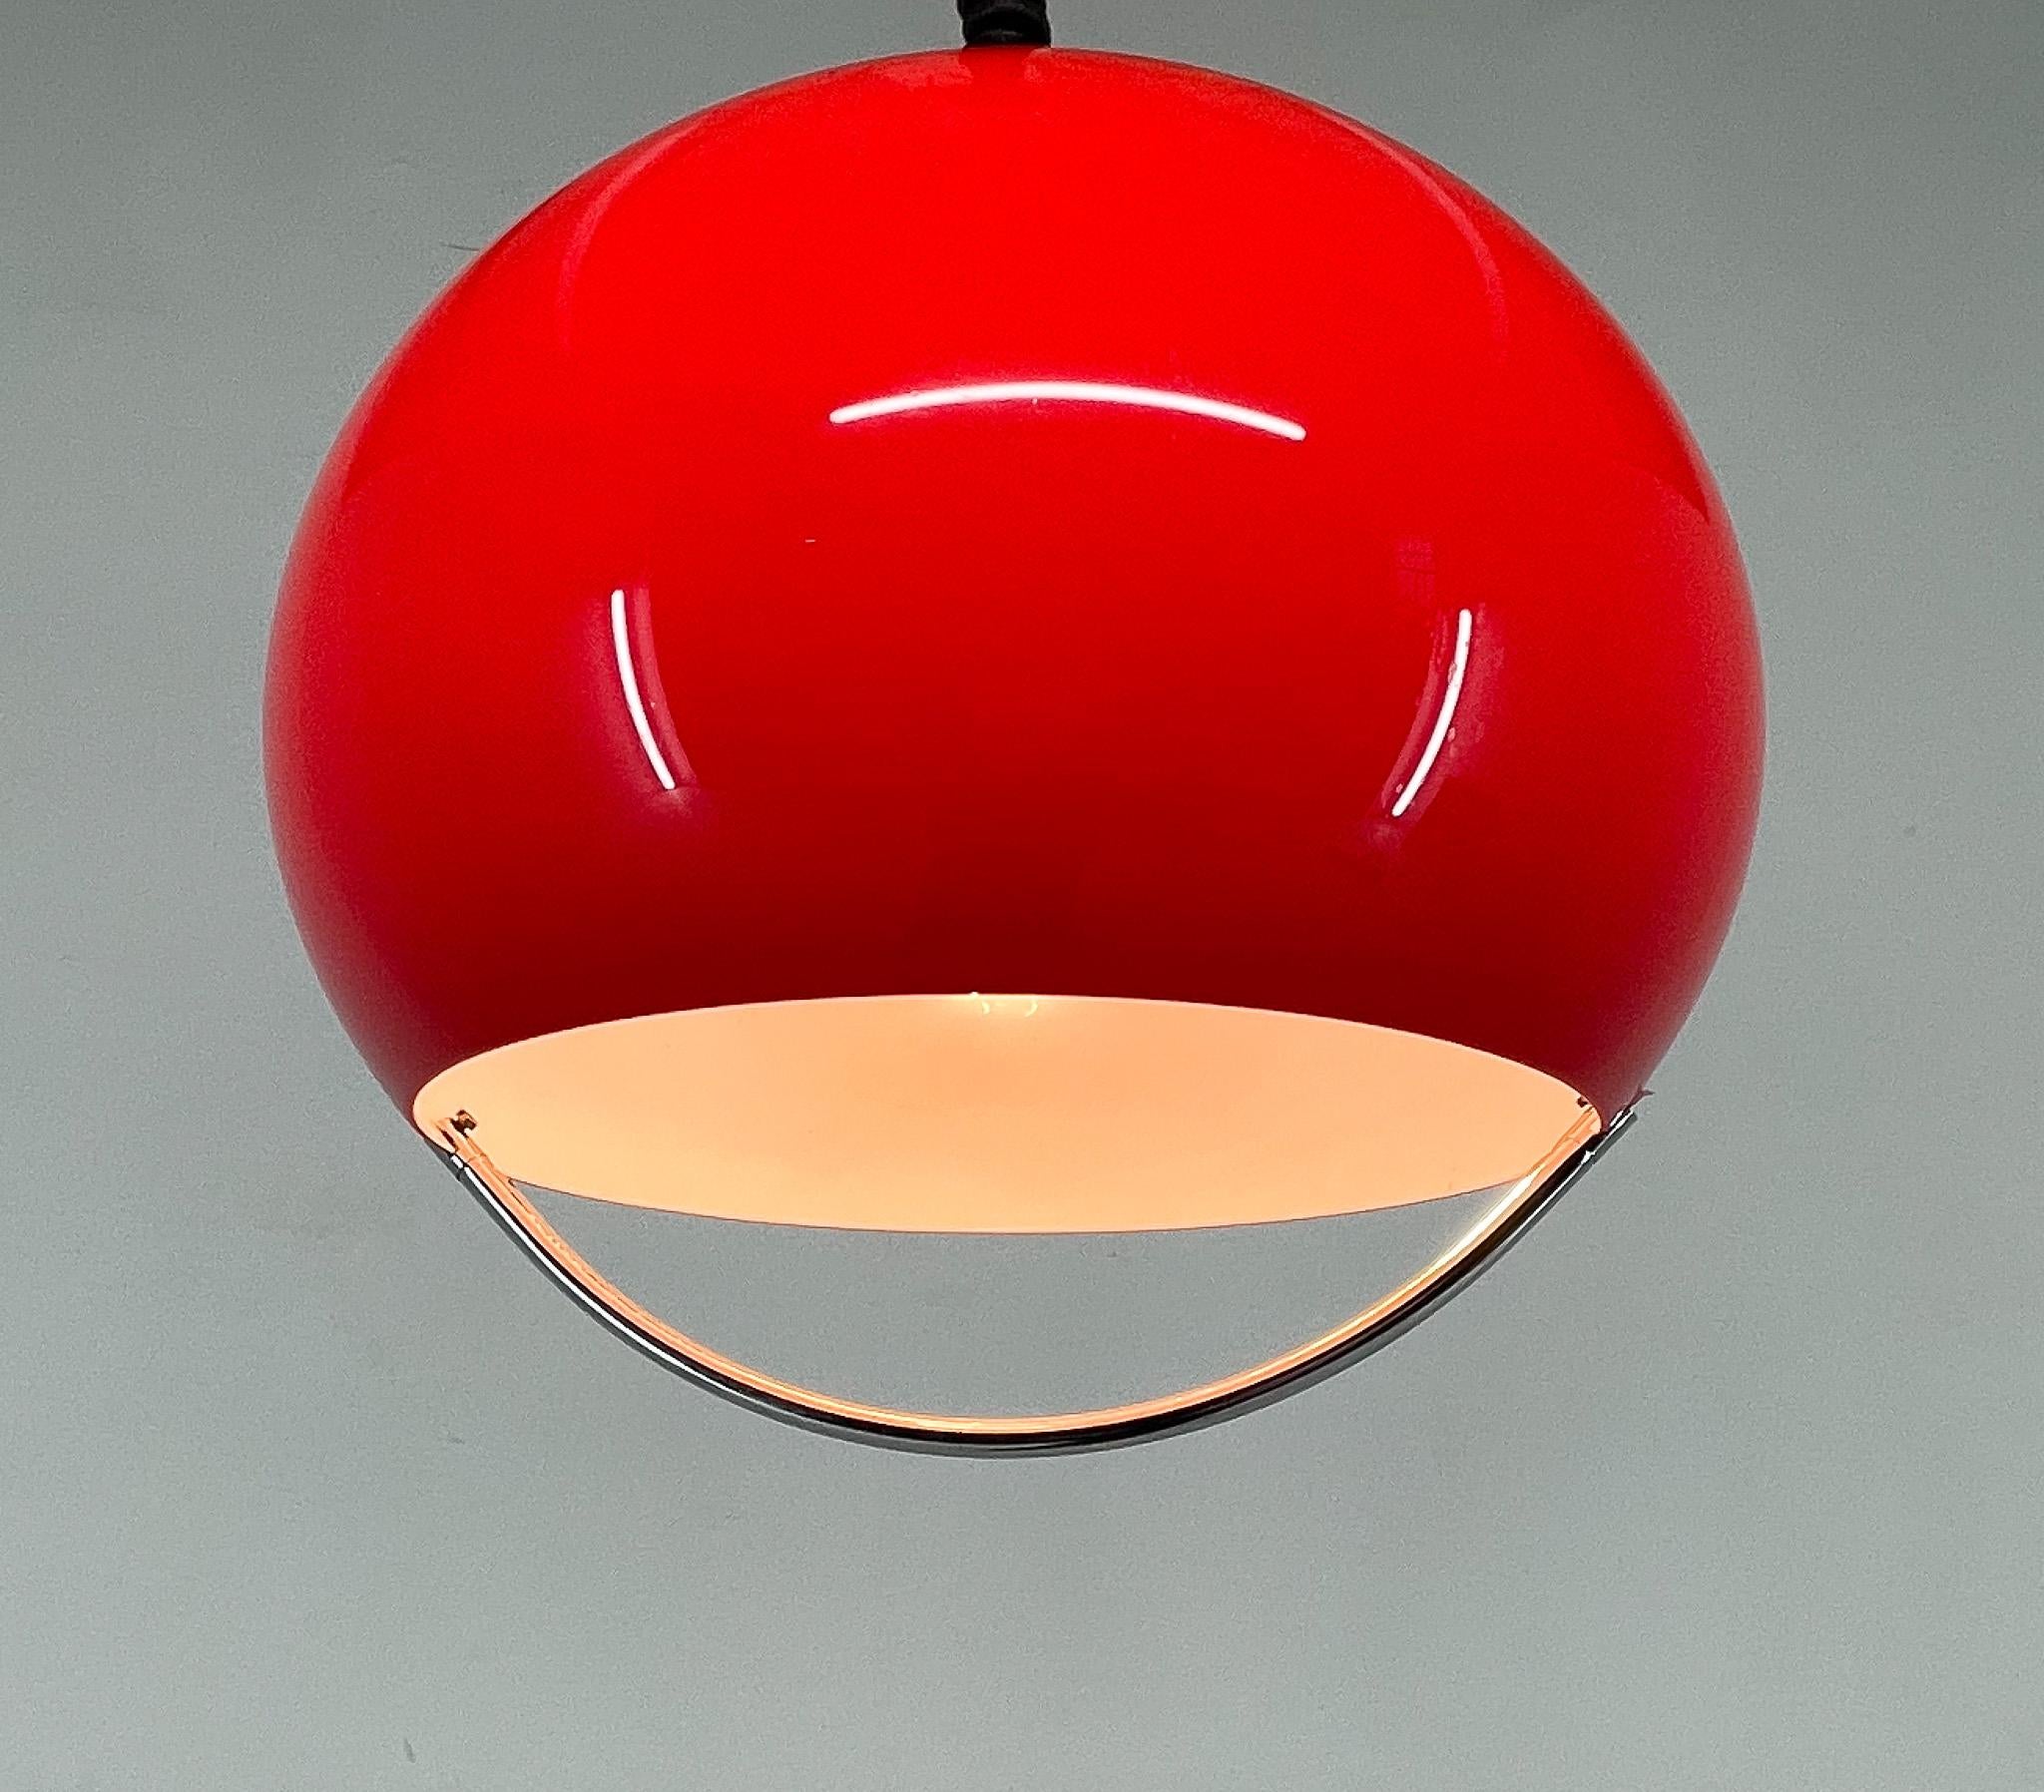 Vintage adjustable, space age pendant, designed by Harvey Guzzini for Meblo in the 1970s. Made in red colour with chrome handle. Good vintage condition. The max hight when fully stretched is 135 cm.